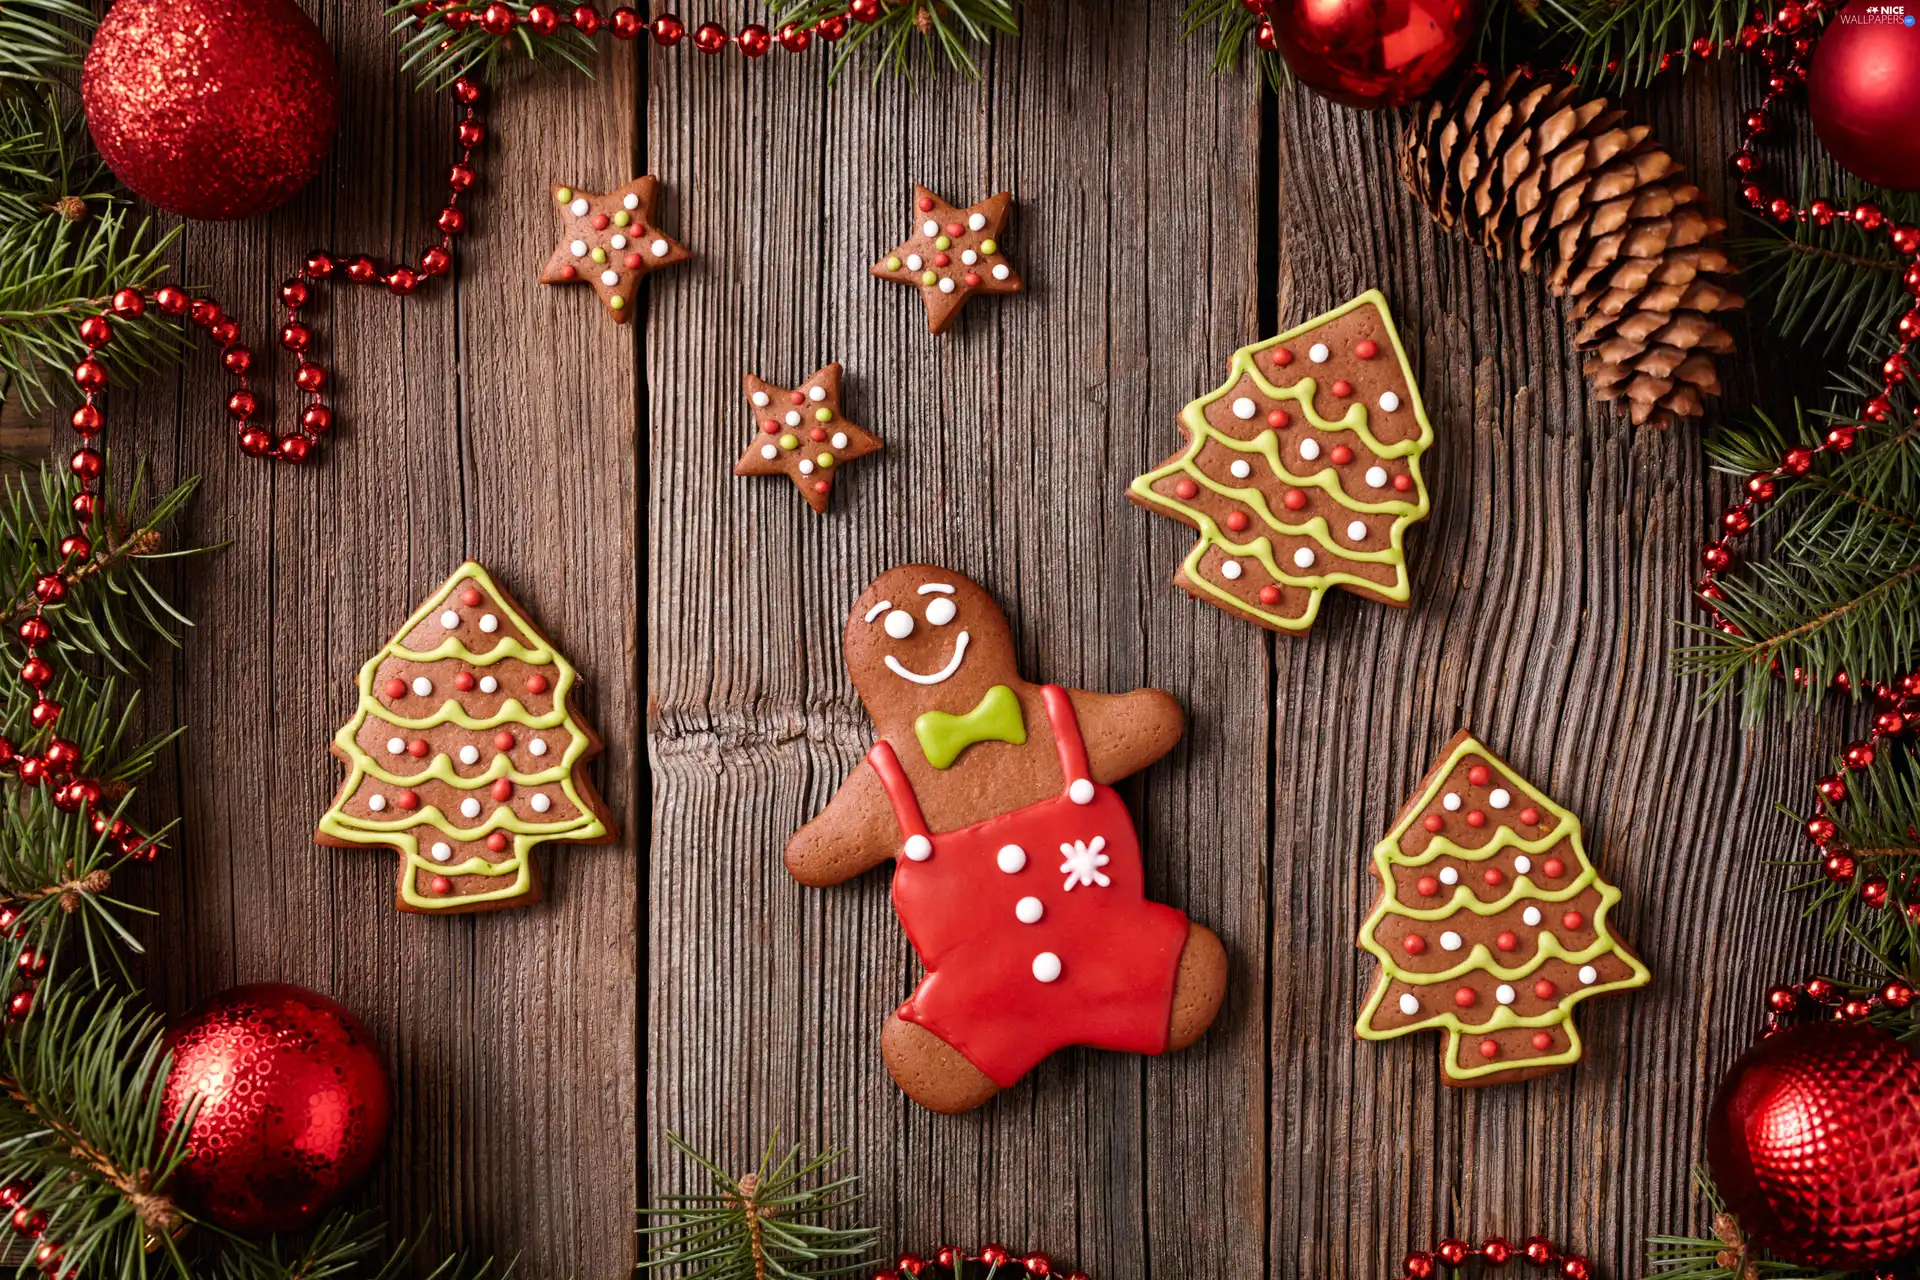 Gingerbread, Christmas, M&Ms mate, Stars, cones, boarding, Twigs, chain, Christmas